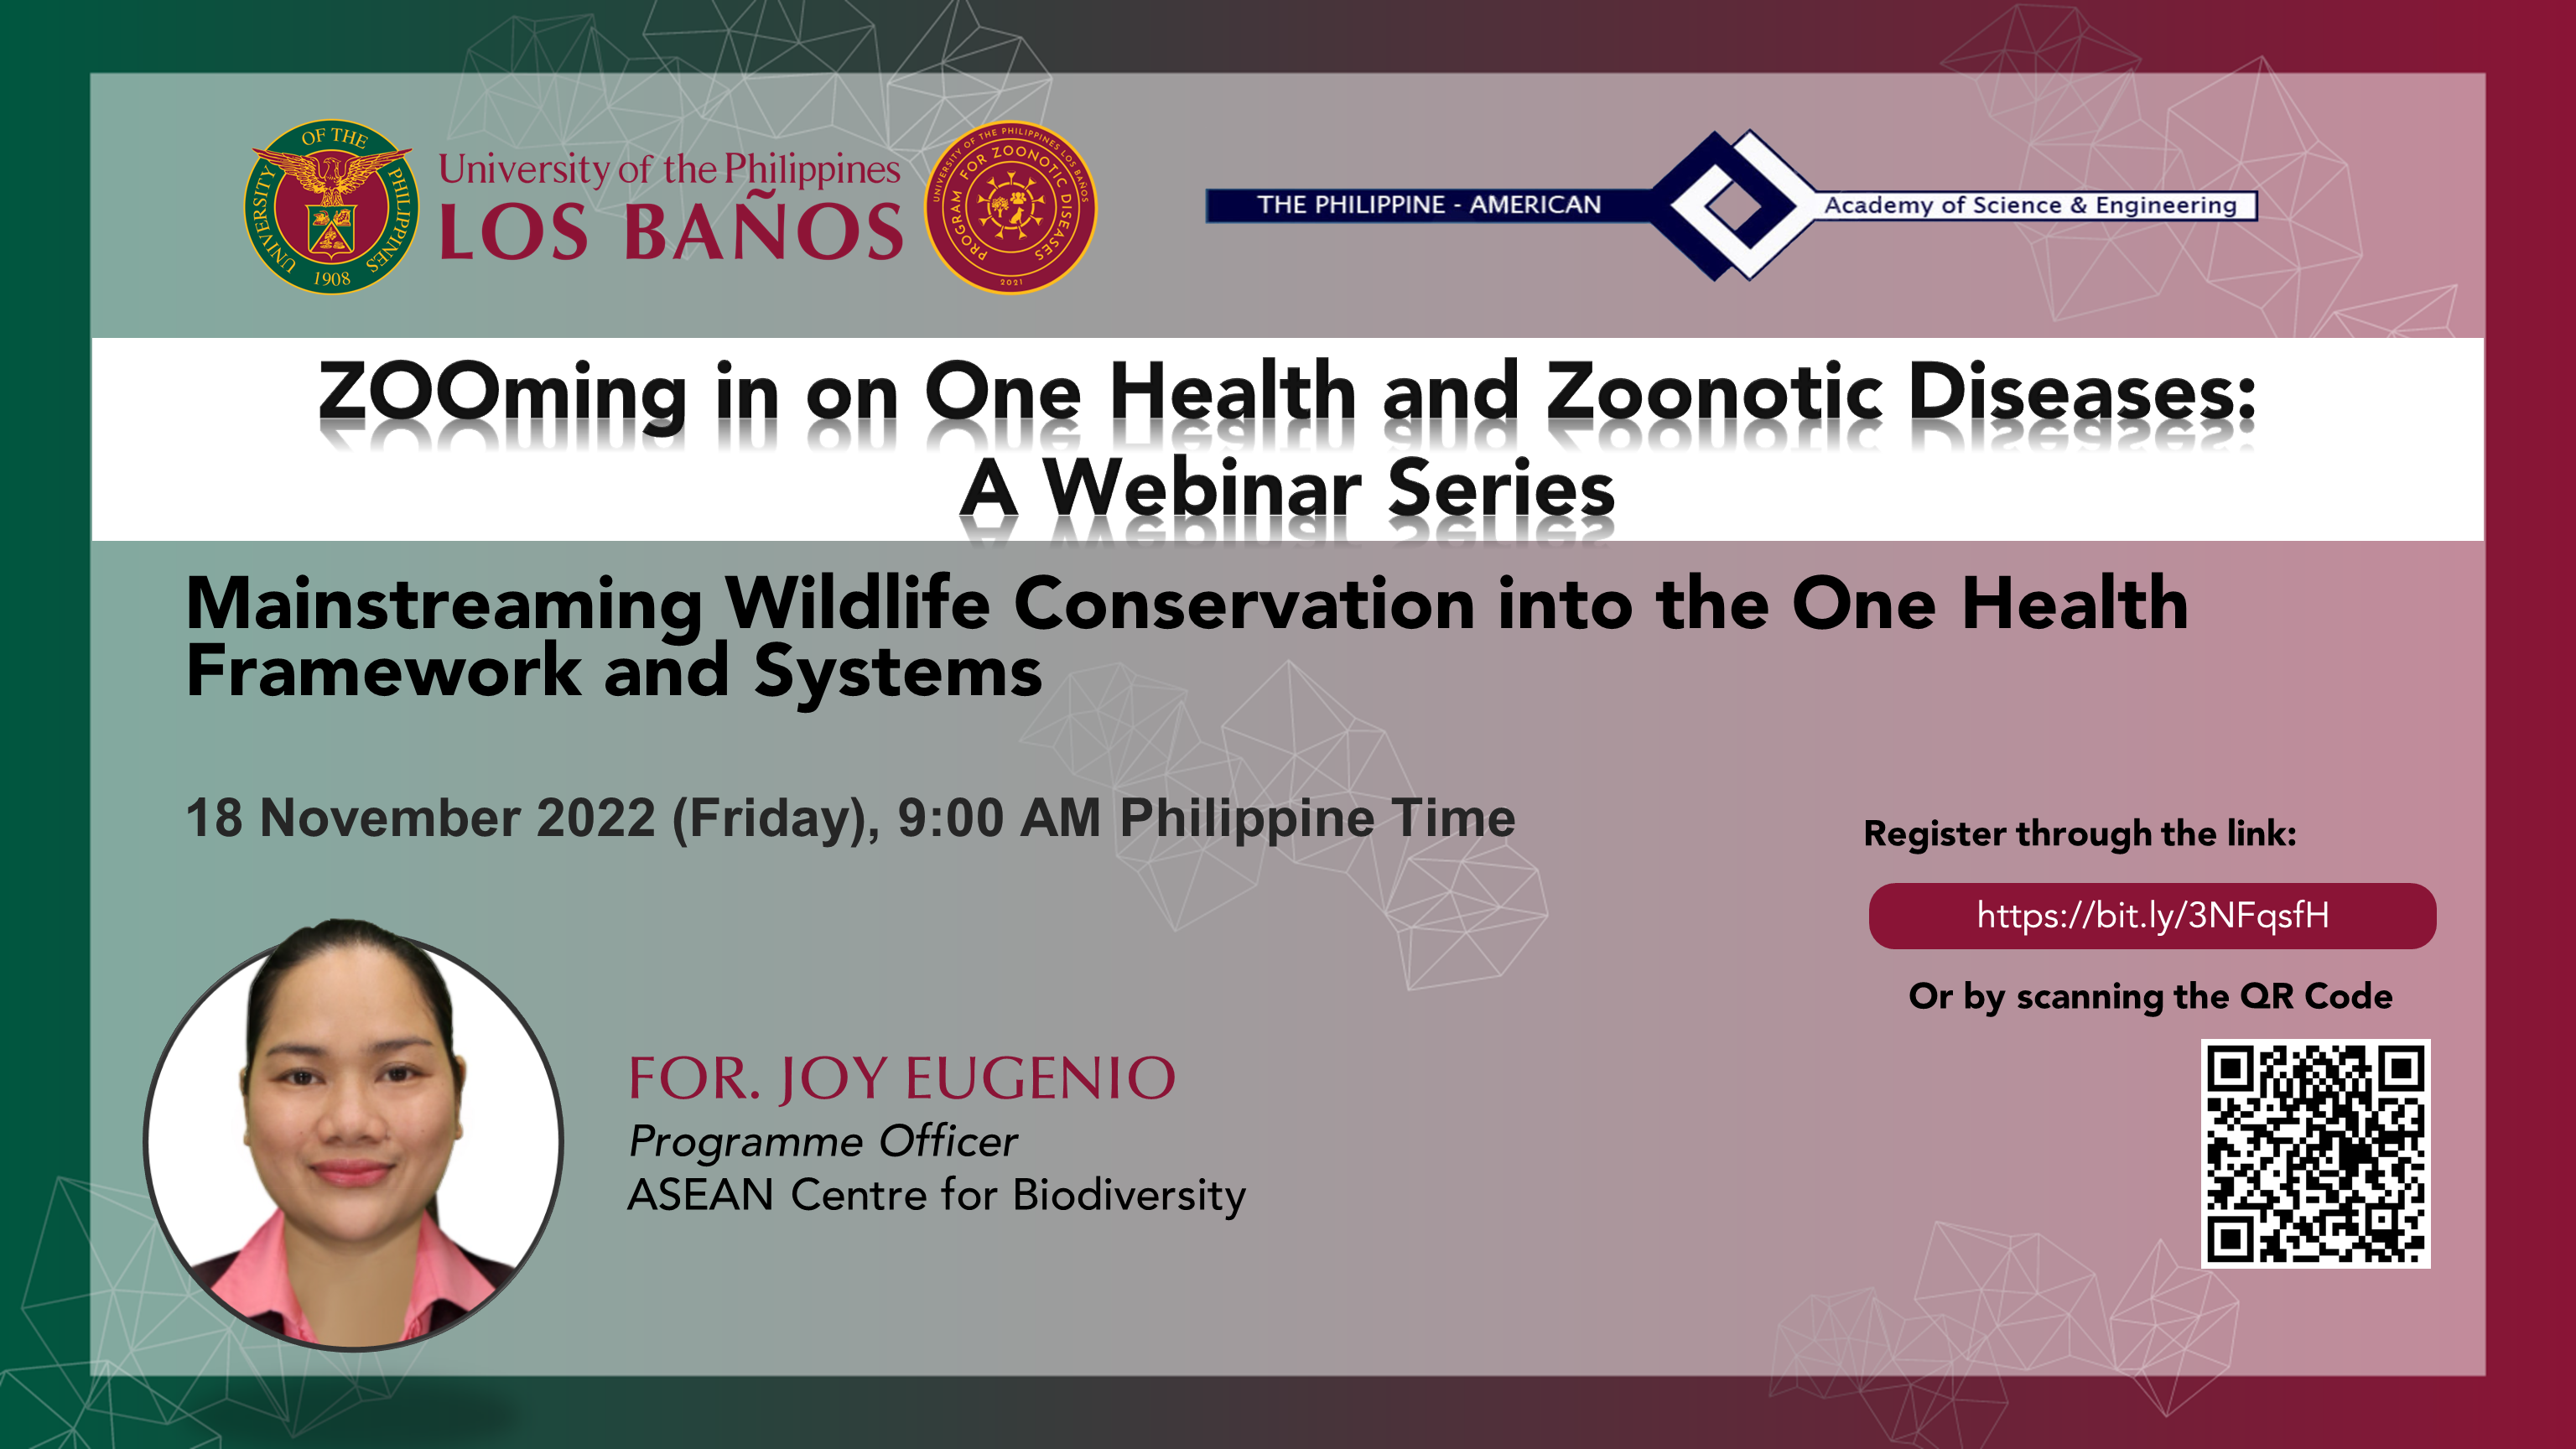 Mainstreaming Wildlife Conservation into the One Health Framework and Systems